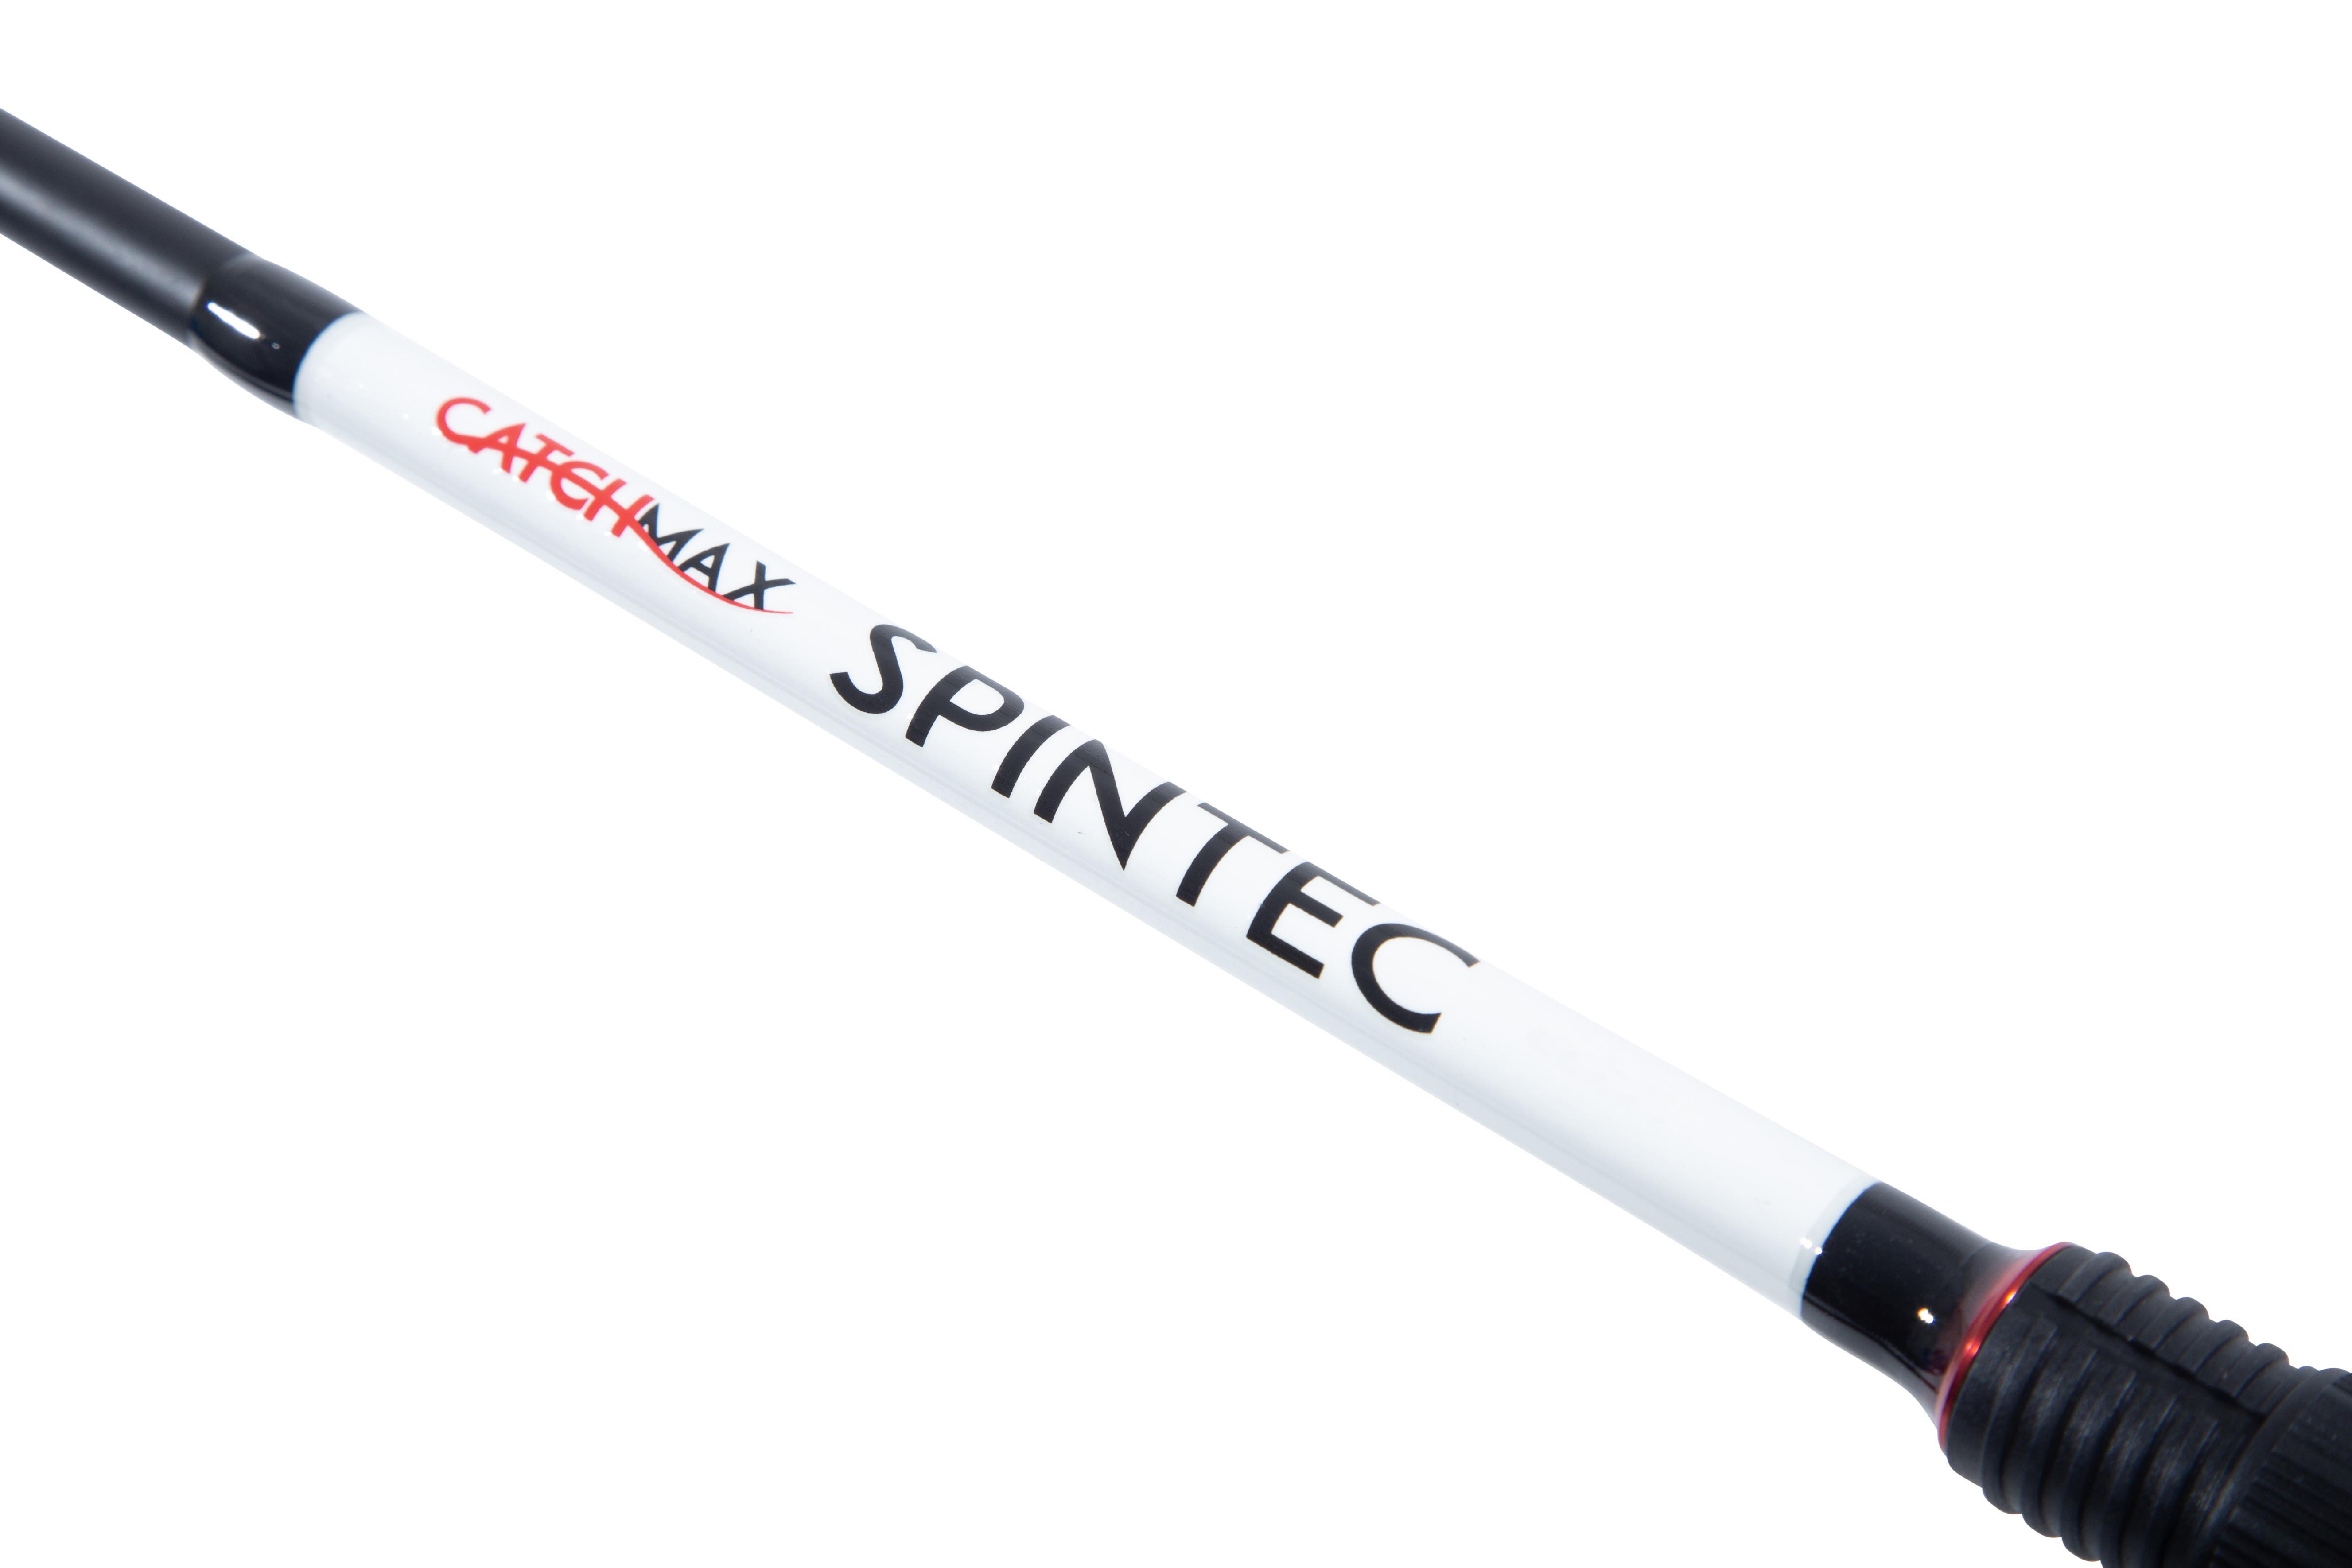 Catchmax Spintec Spinnrute